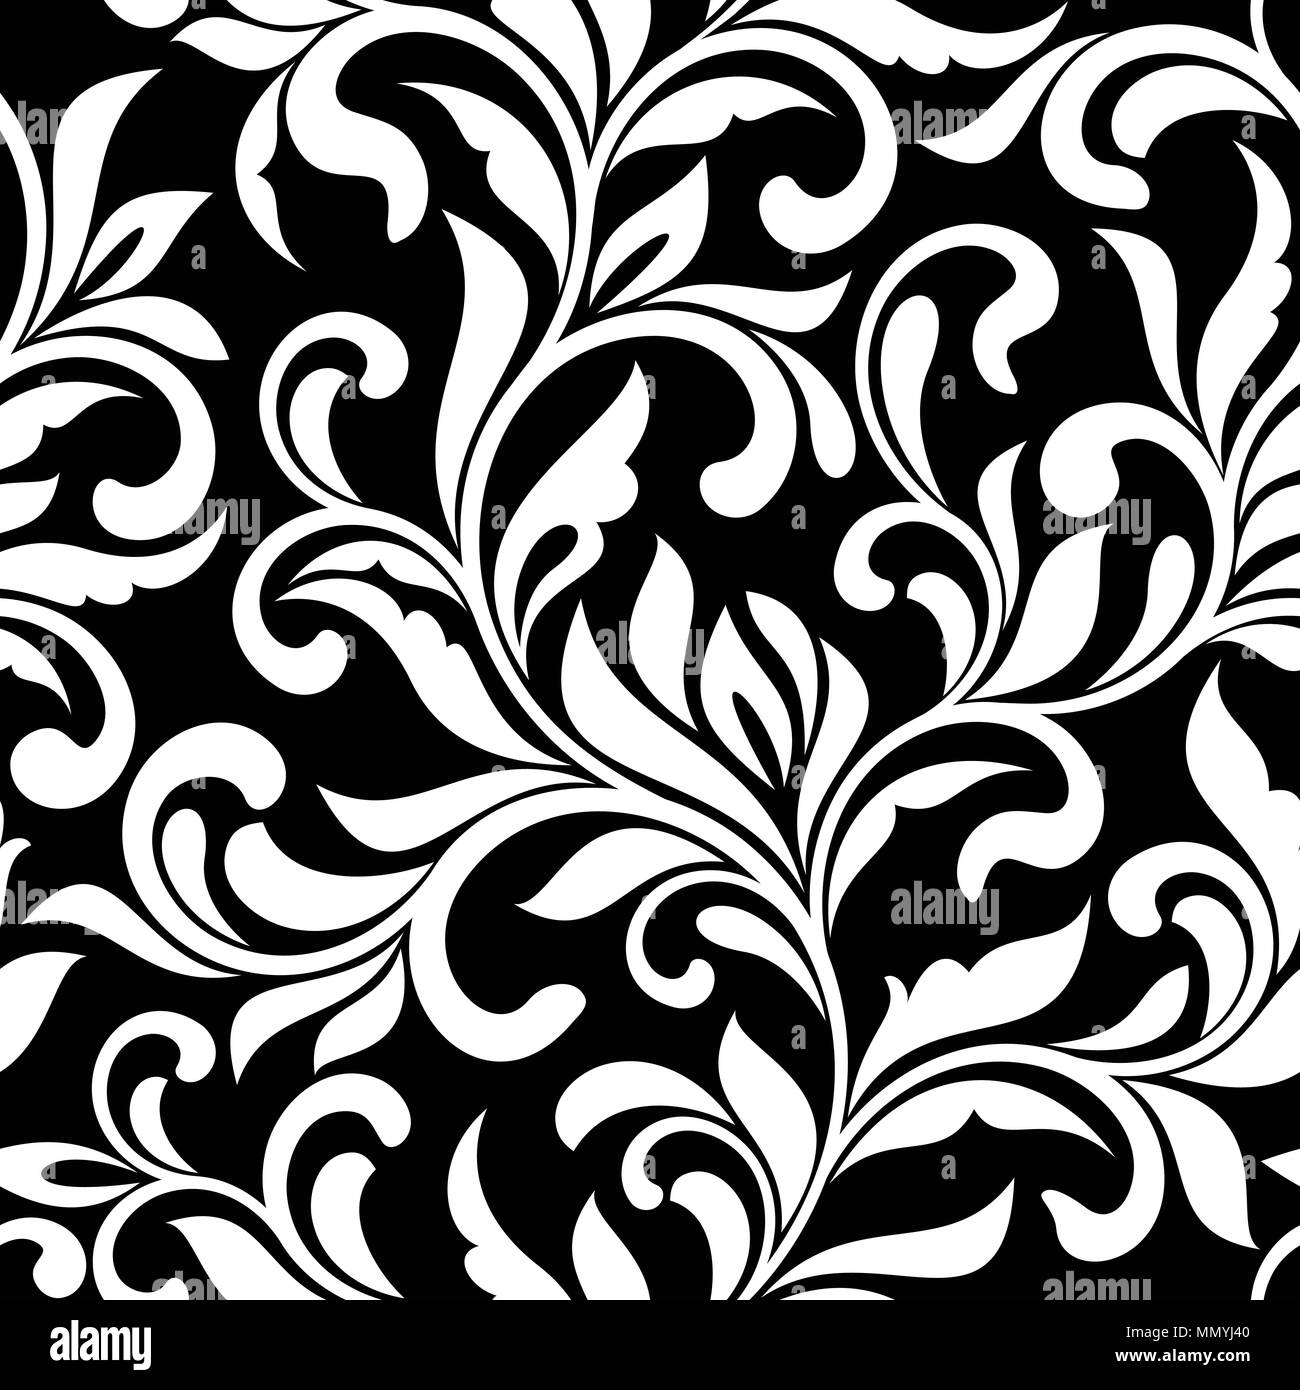 https://c8.alamy.com/comp/MMYJ40/elegant-seamless-pattern-tracery-of-swirls-and-decorative-leaves-on-a-black-background-vintage-style-it-can-be-used-for-printing-on-fabric-wallpap-MMYJ40.jpg